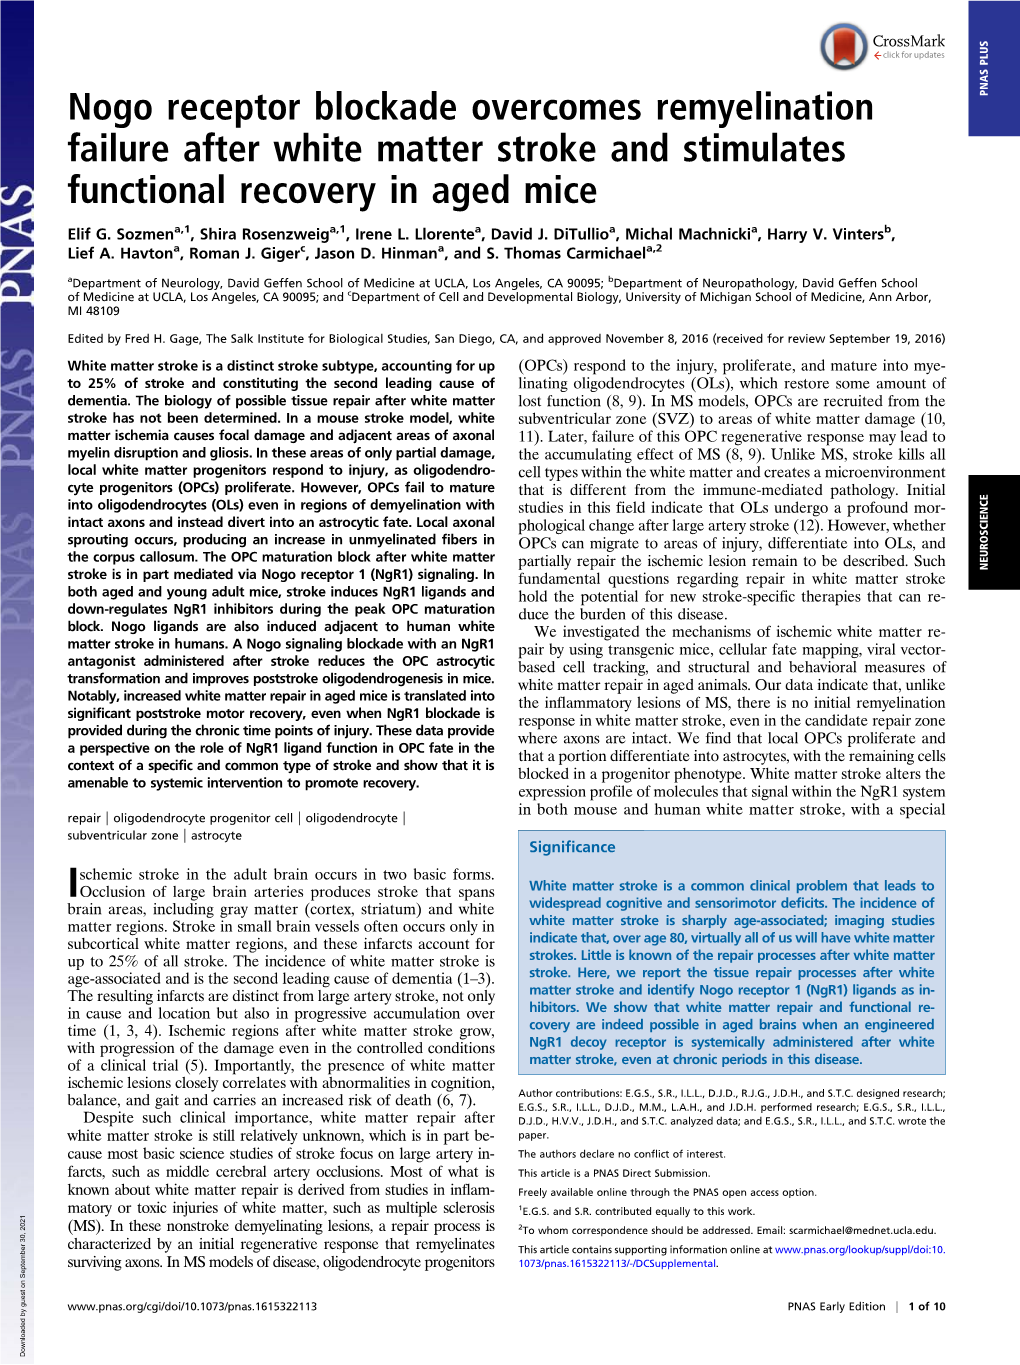 Nogo Receptor Blockade Overcomes Remyelination Failure After White Matter Stroke and Stimulates Functional Recovery in Aged Mice